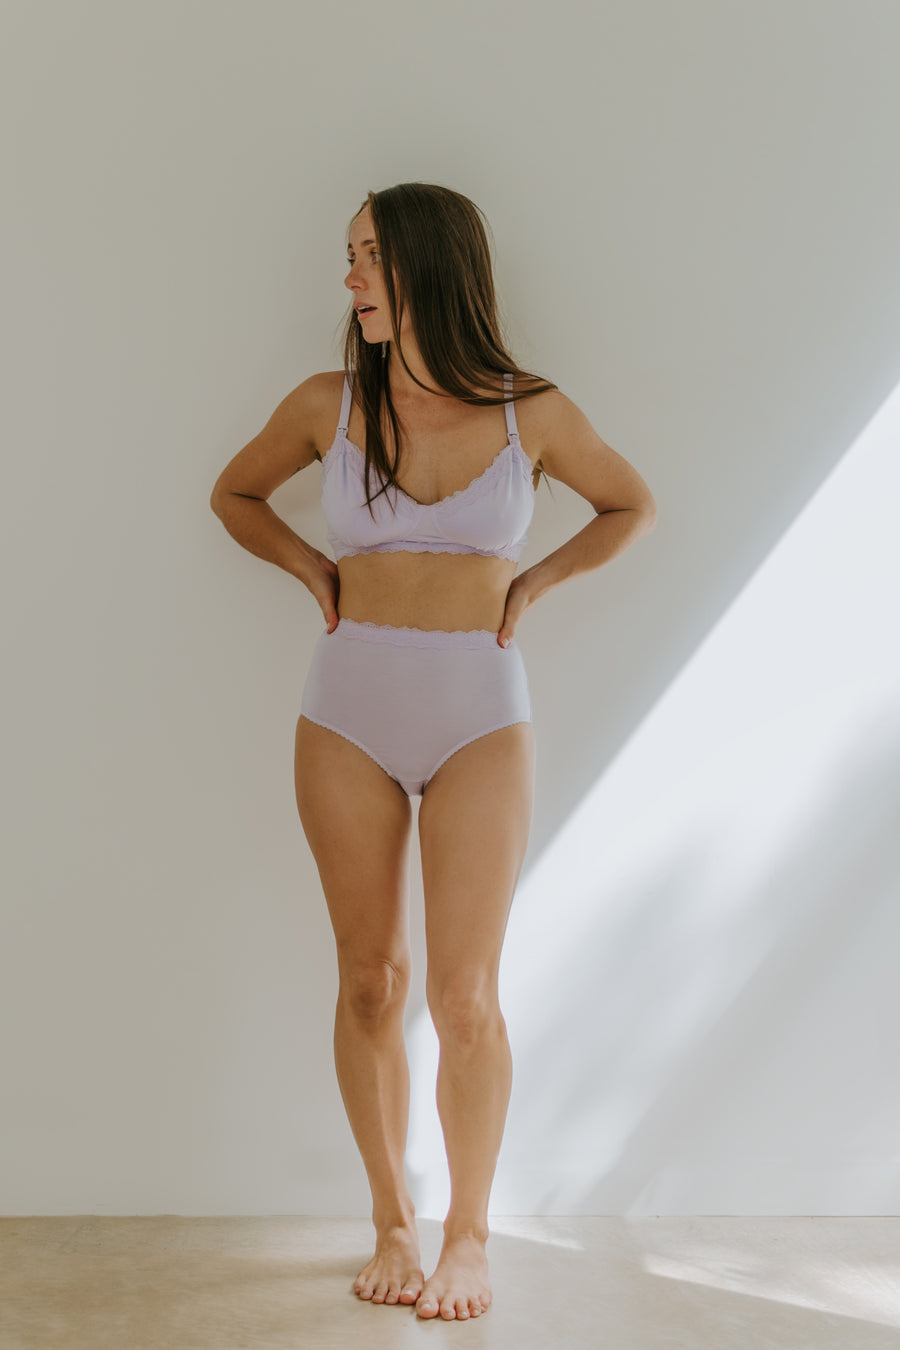 Pregnancy and maternity lingerie